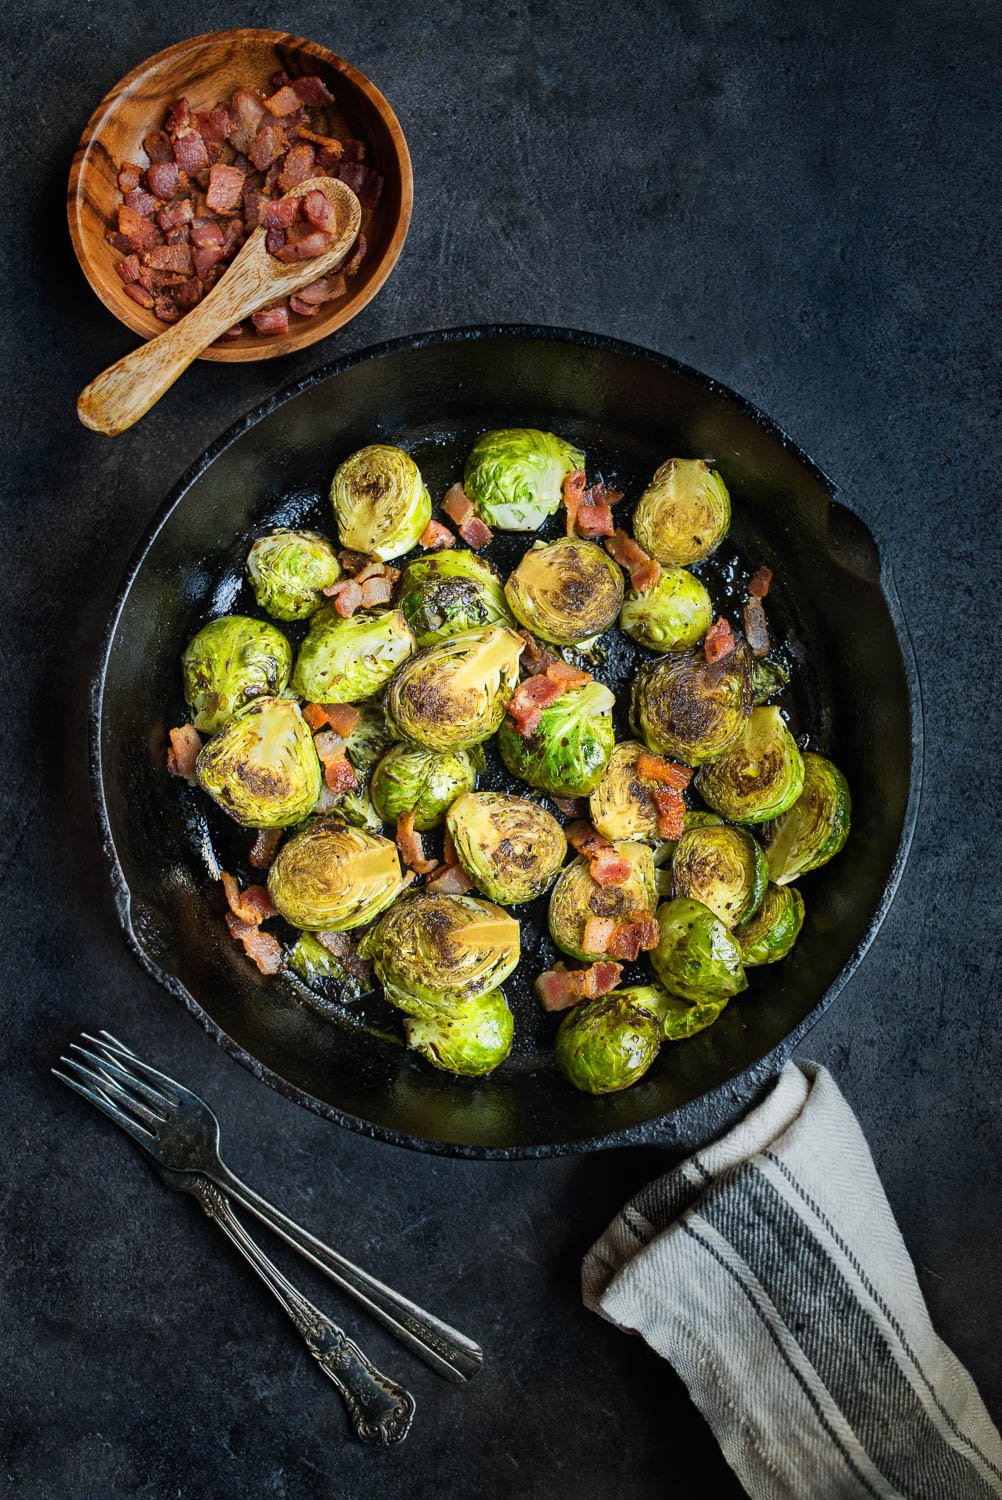 Orlando-Food-Photographer-Mike-Gluckman-Brussels-Sprouts.jpg